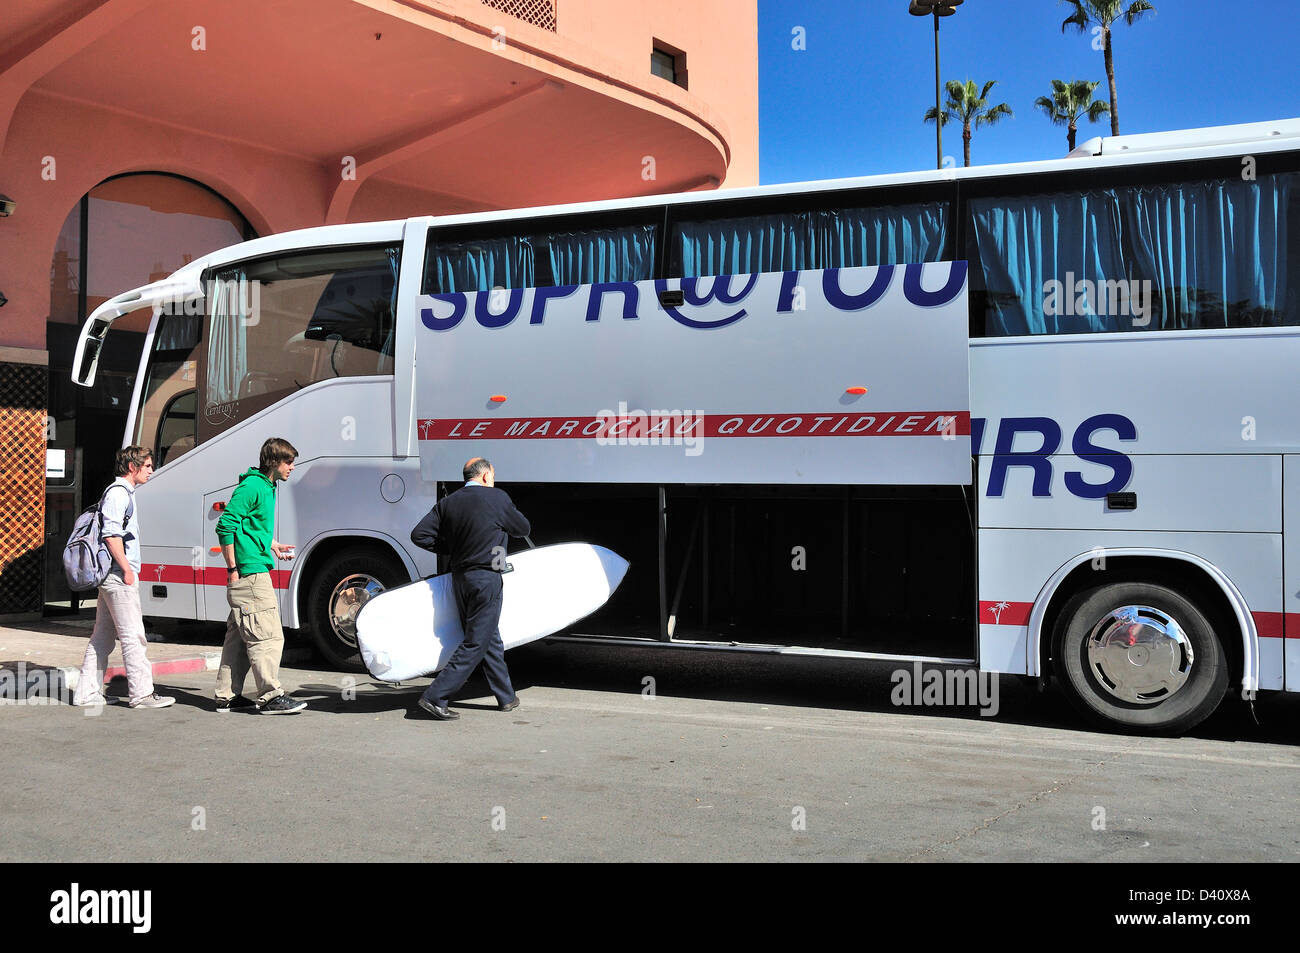 Surfboard being loaded into hold of Moroccan long distance Supratours coach at the main coach station in Marrakech, Morocco, North Africa Stock Photo